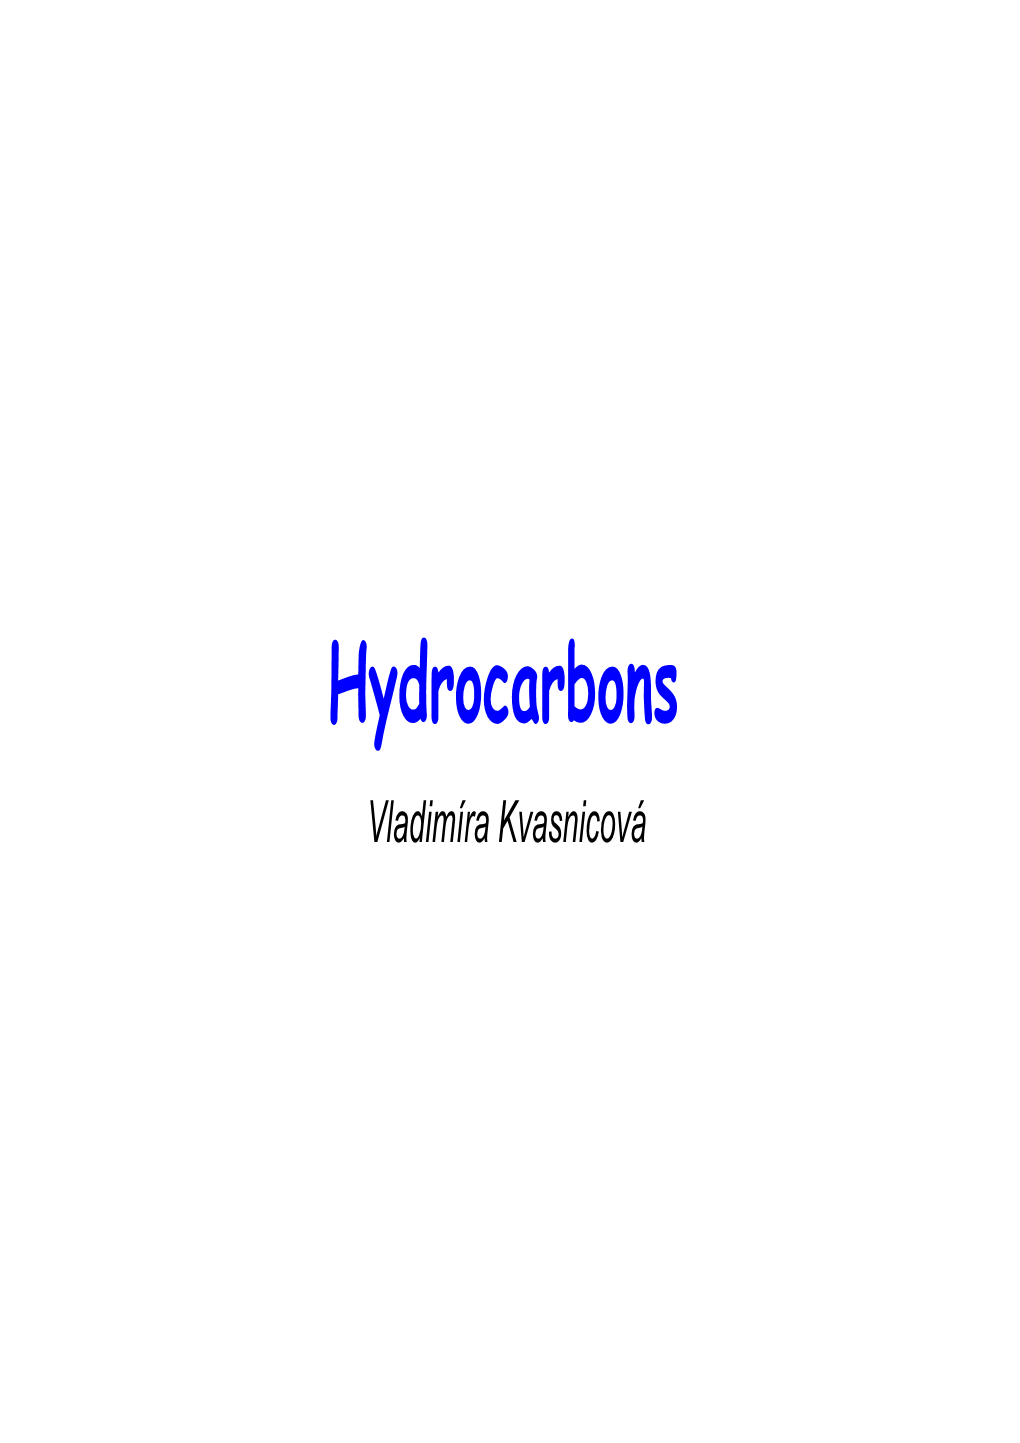 104-Hydrocarbons (Lecture 4).Pdf